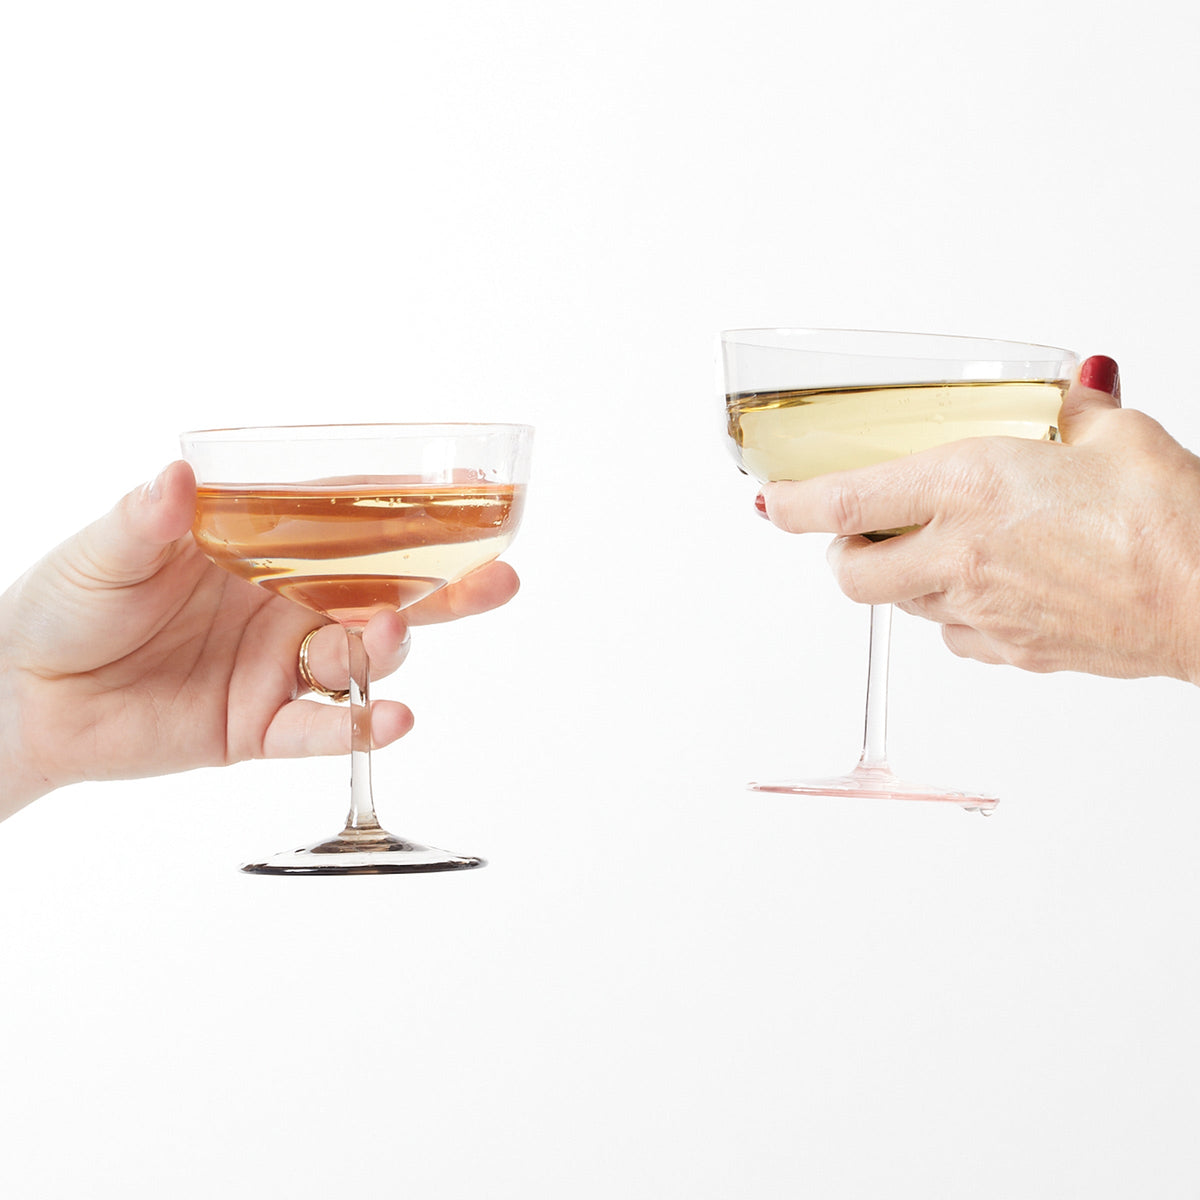 A pair of Celia Rose &amp; Mocha Coupe Cocktail Glasses by Caskata filled with wine, held by hands.